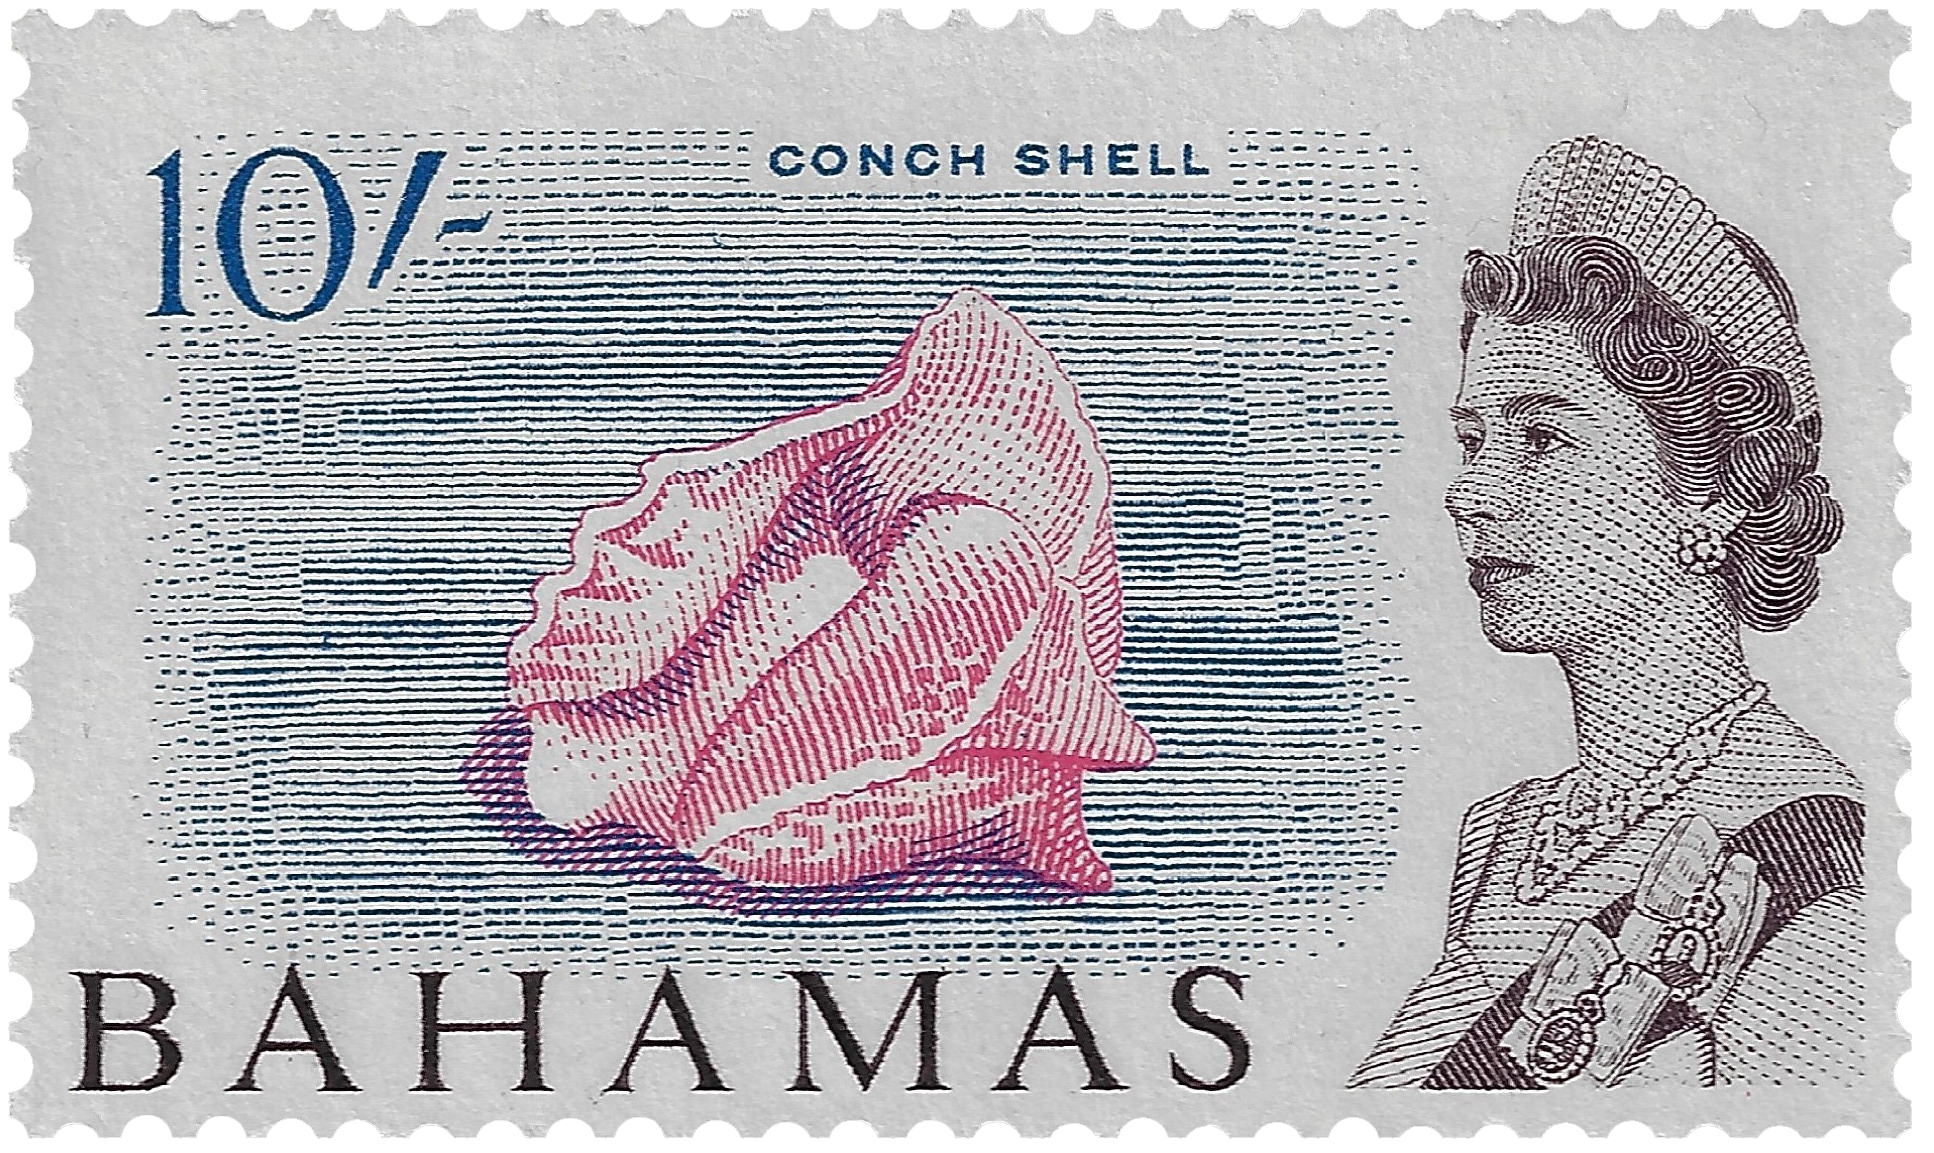 10s 1965, Conch Shell